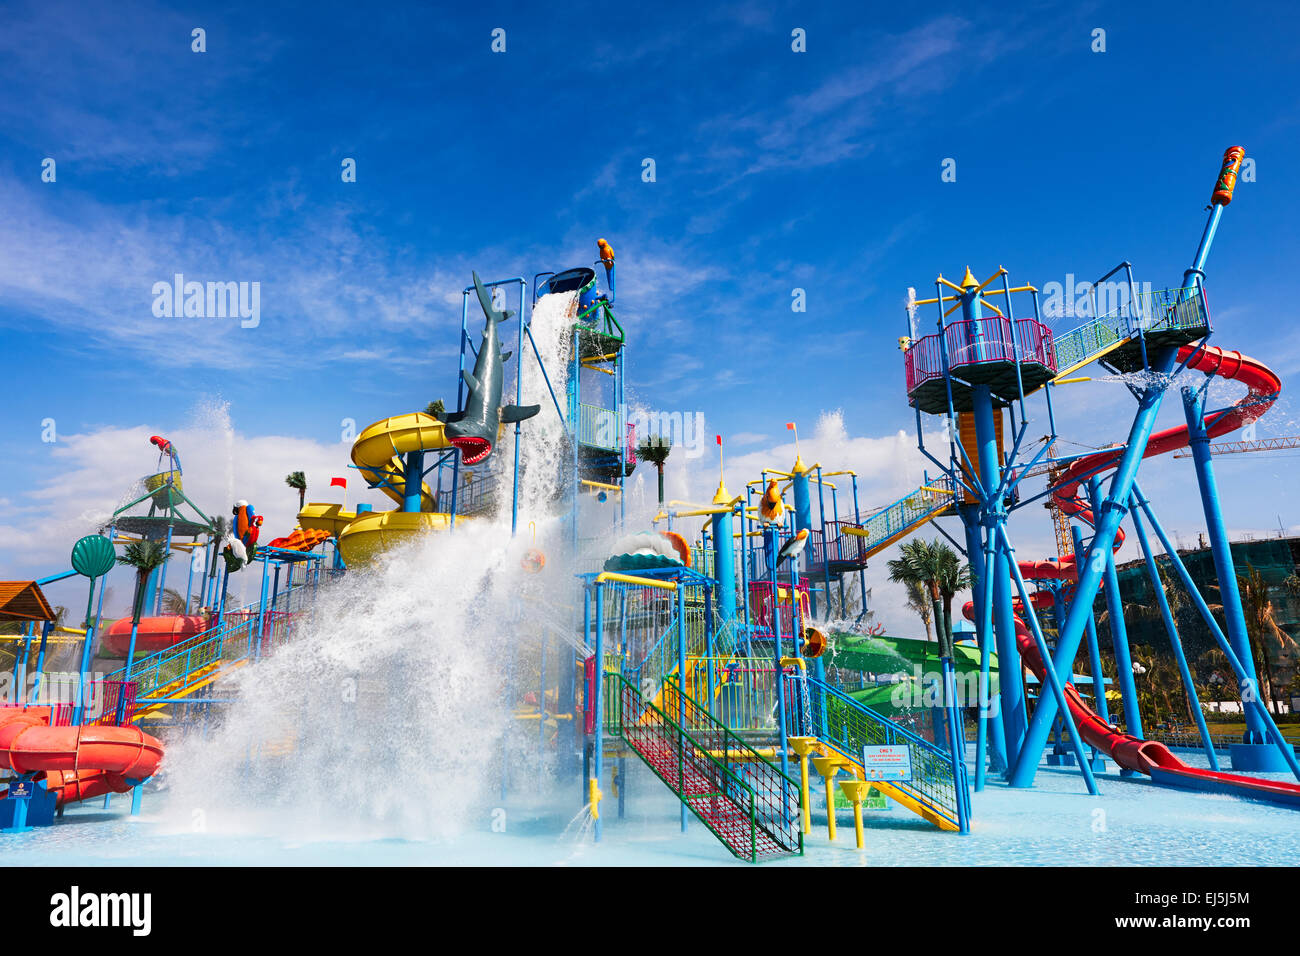 Water rushing down from giant swinging barrel on top of water sliding construction. Vinpearl Land Water Park, Phu Quoc island, Vietnam. Stock Photo